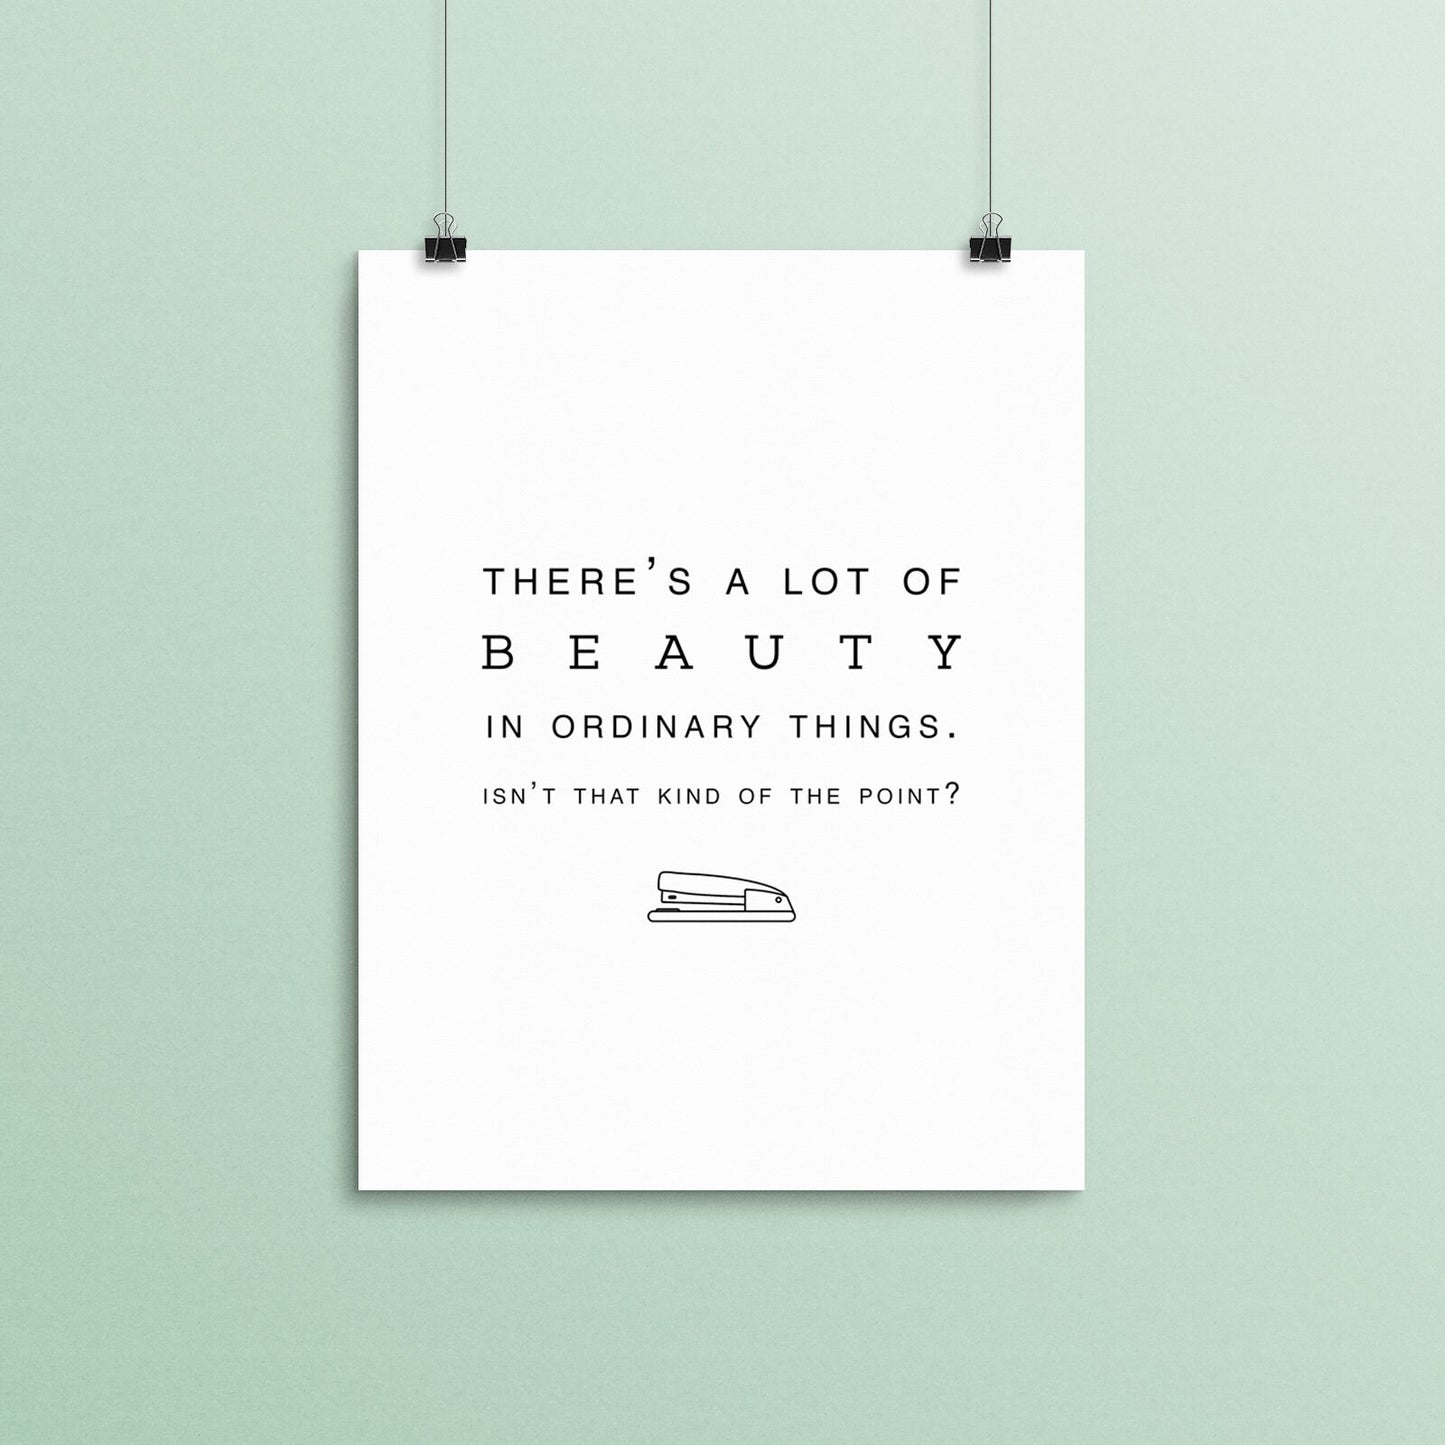 ART PRINT "There's a lot of beauty in ordinary things. Isn't that kind of the point?" - Pam Halpert, The Office